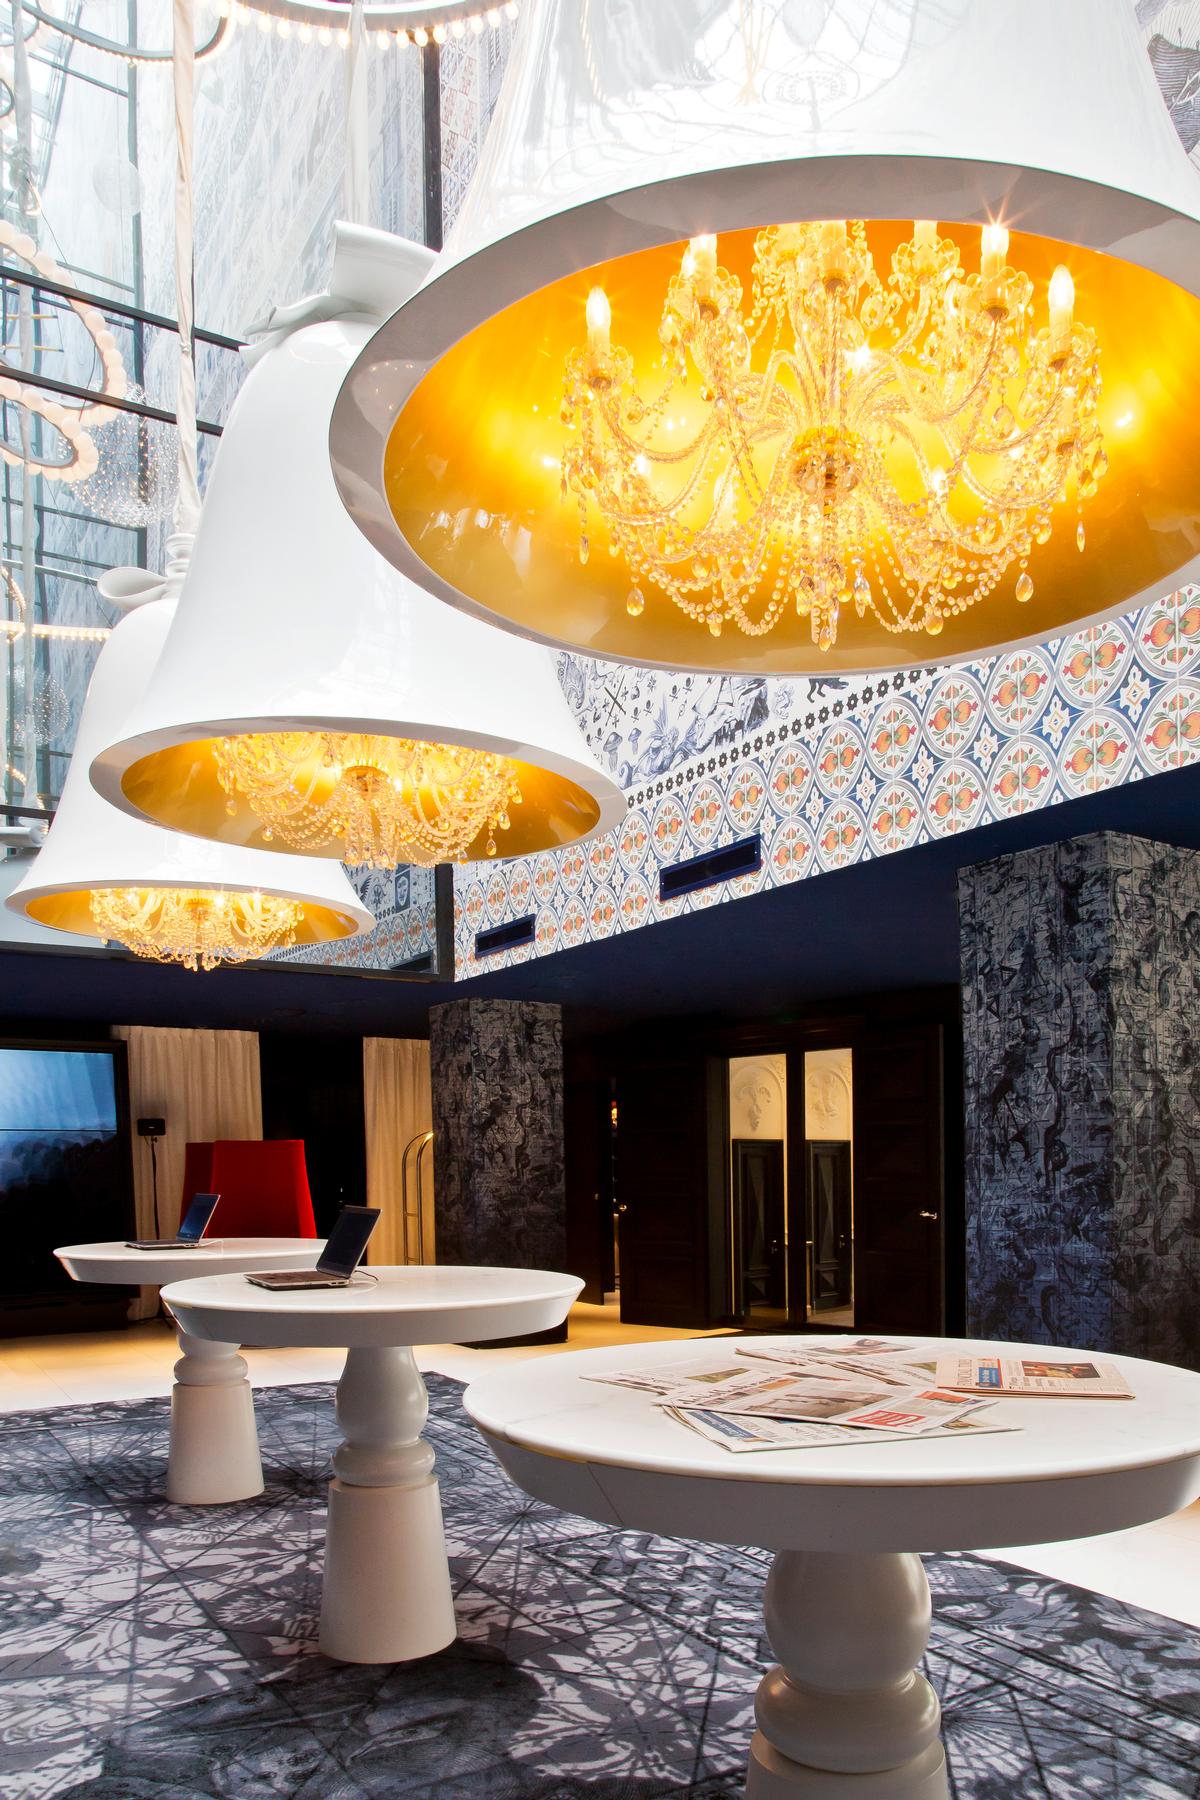 Luxury Interior Design Ideas by Marcel Wanders: mixing old and new